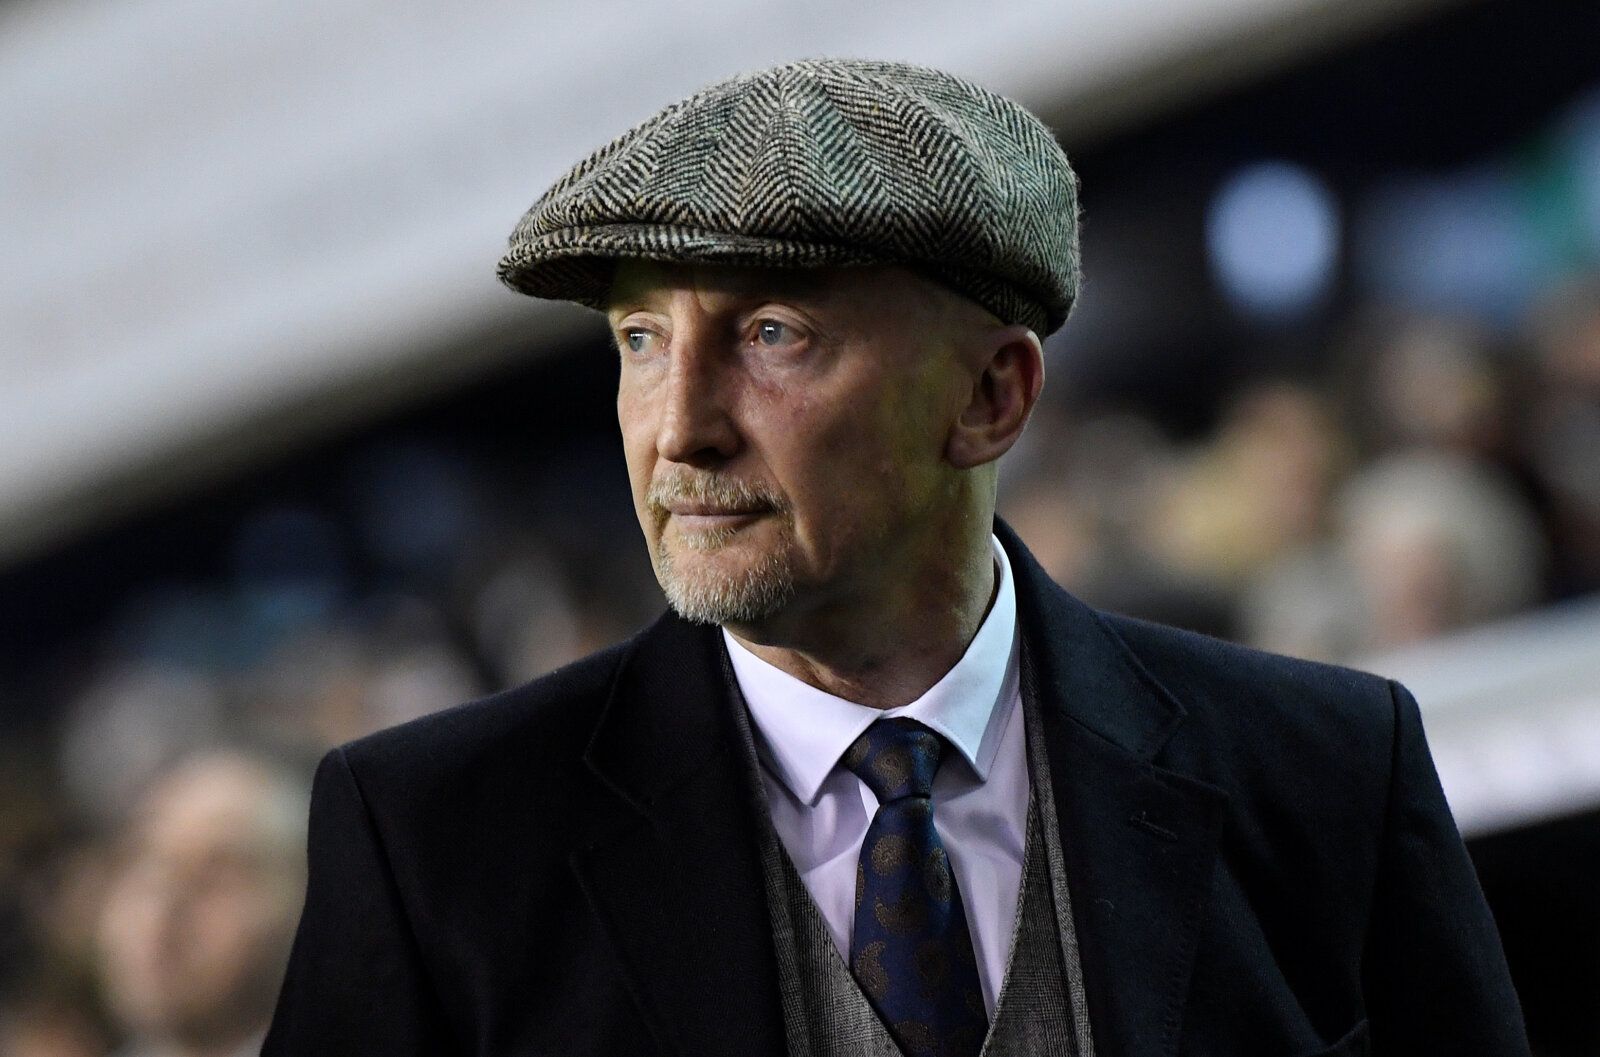 Soccer Football - Championship - Millwall vs Queens Park Rangers - The Den, London, Britain - December 29, 2017  Queens Park Rangers manager Ian Holloway before the match   Action Images/Tony O'Brien  EDITORIAL USE ONLY. No use with unauthorized audio, video, data, fixture lists, club/league logos or 